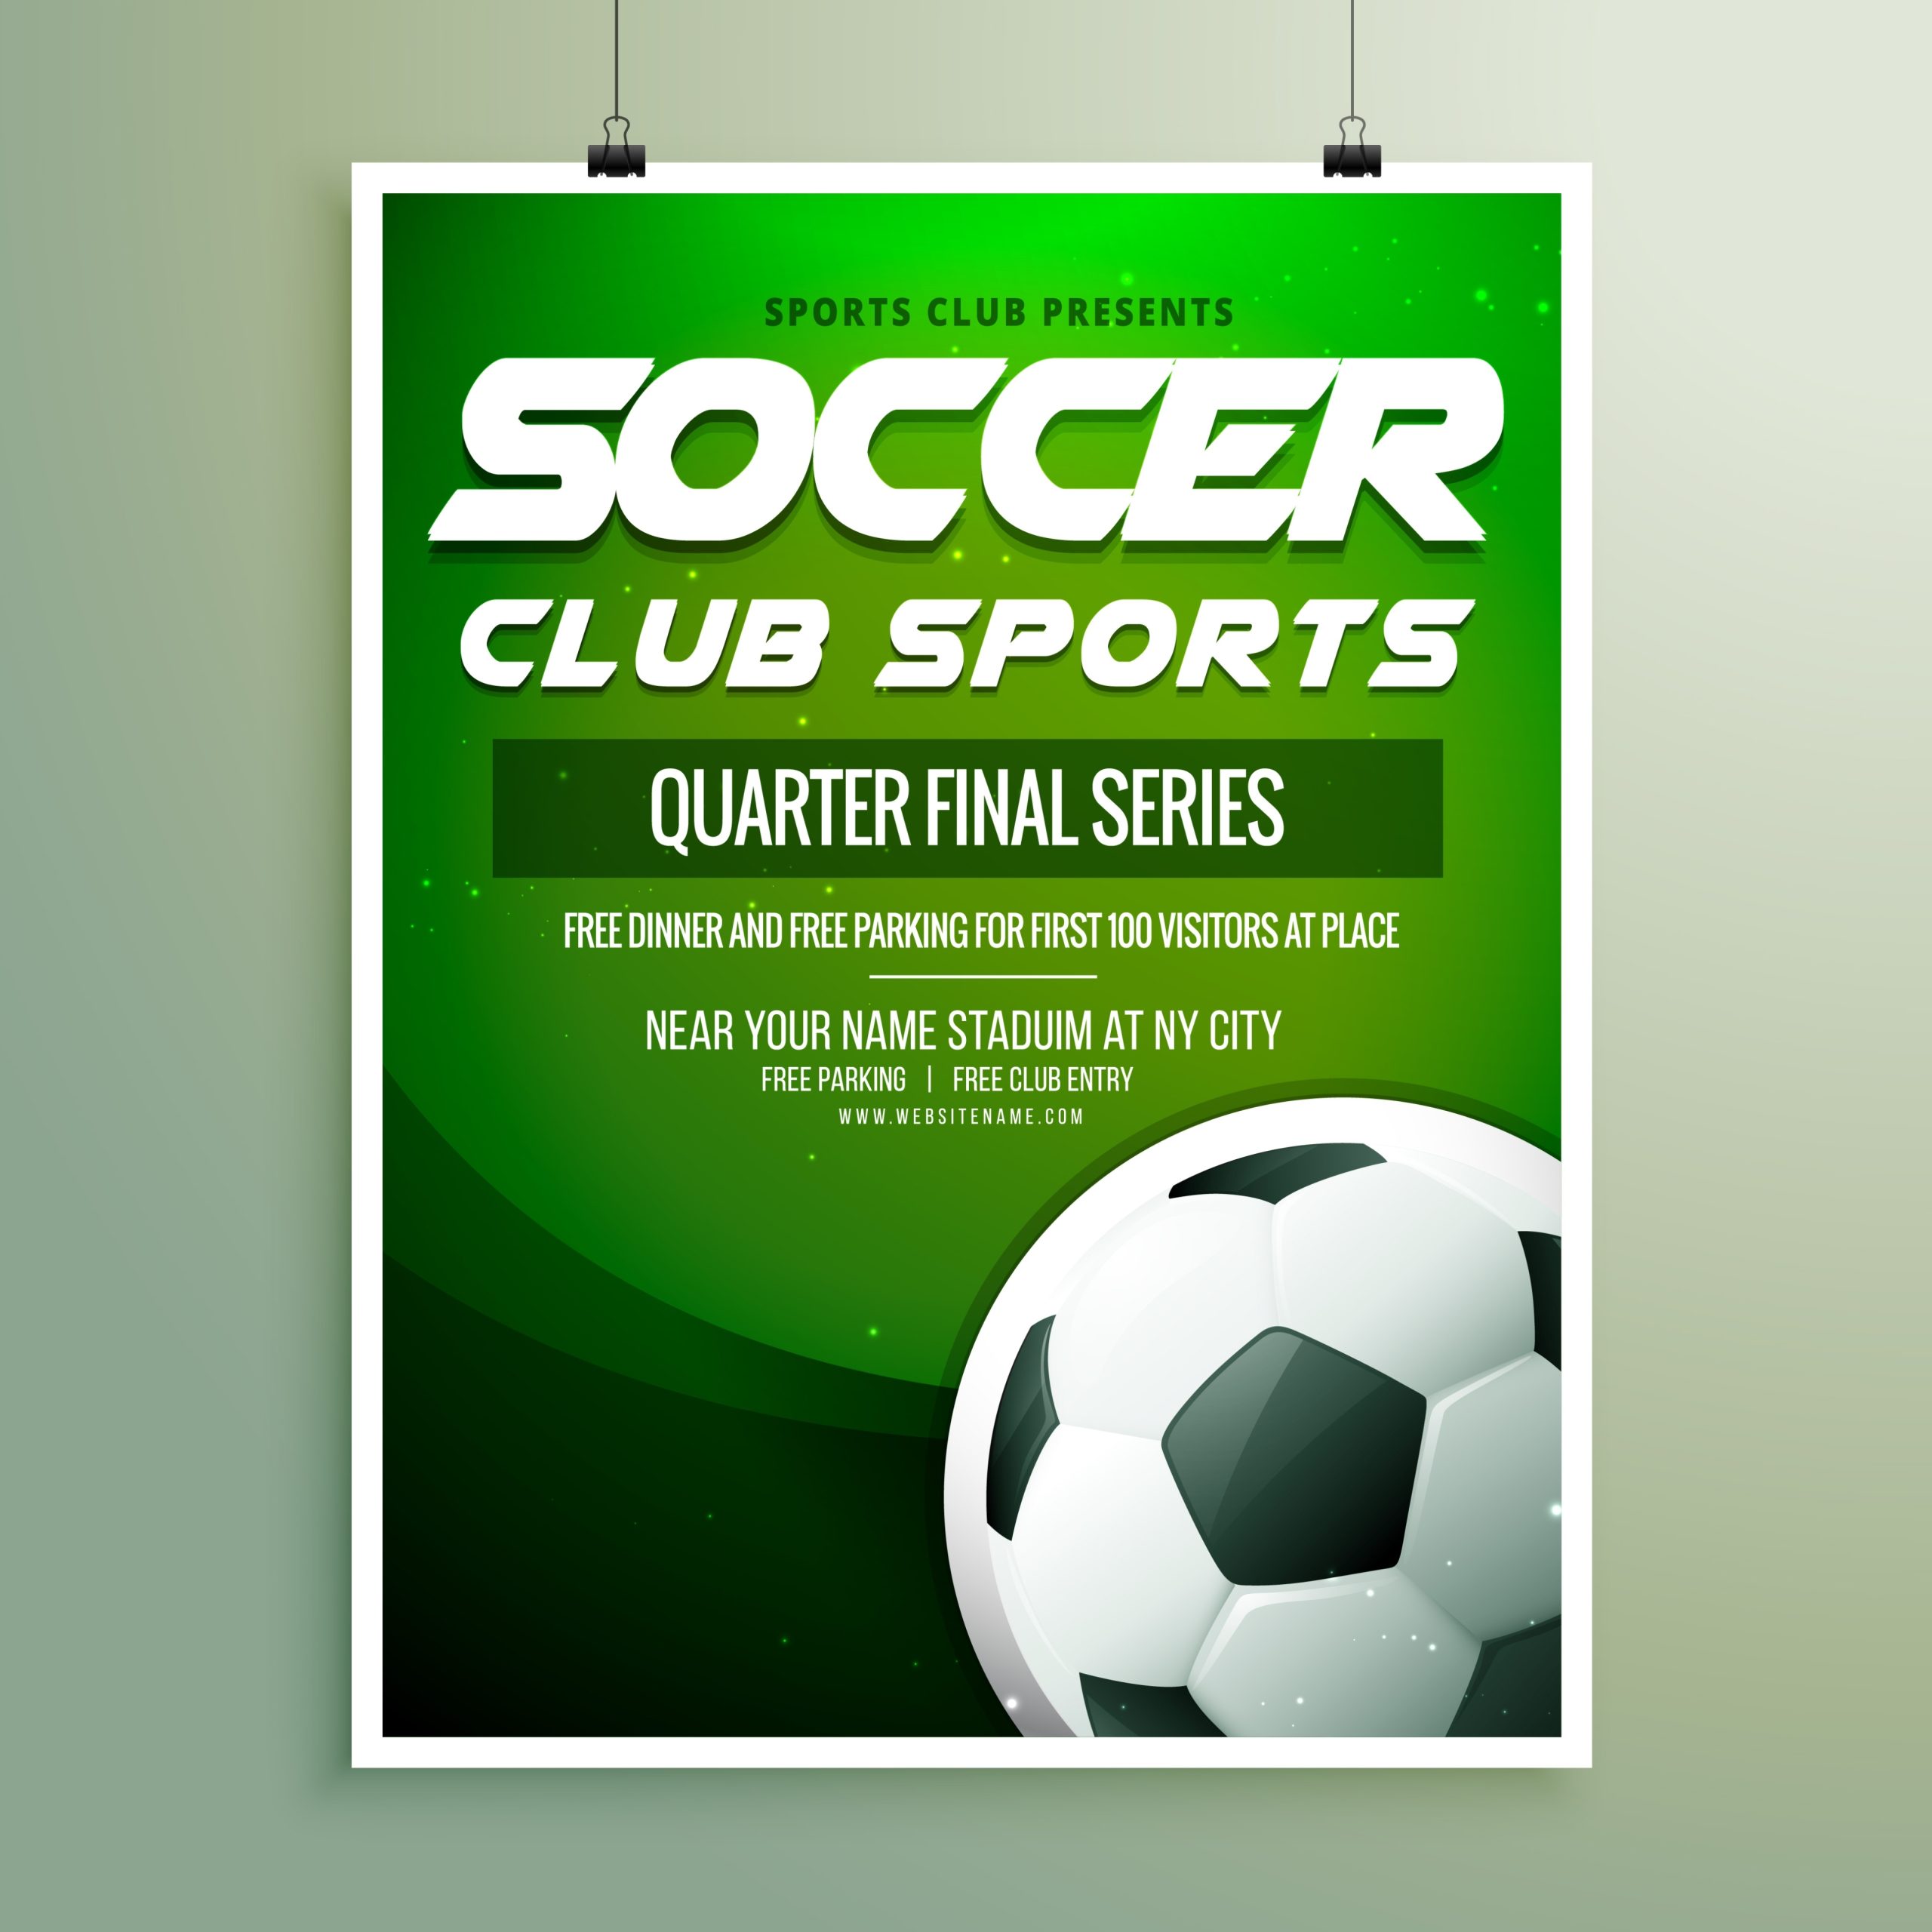 Soccer Club Sports Championship Flyer Template - Download Free Vector Art, Stock Graphics &amp; Images regarding Football Tournament Flyer Template